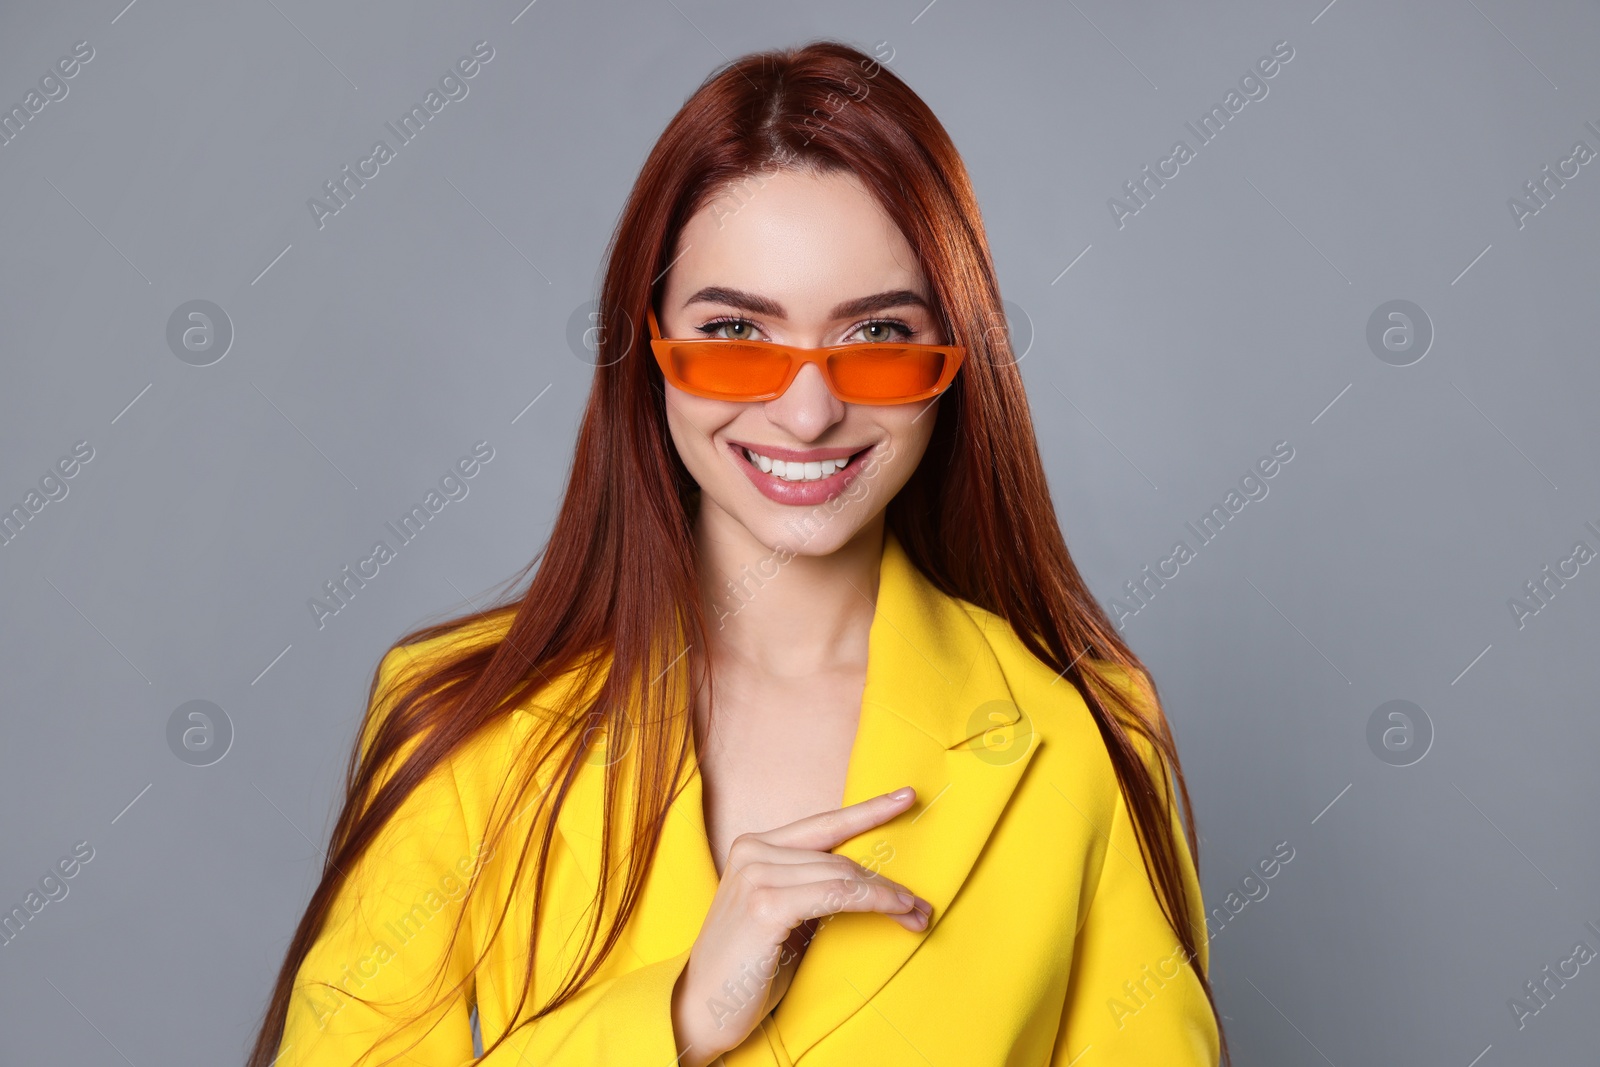 Photo of Stylish woman with red dyed hair and orange sunglasses on light gray background